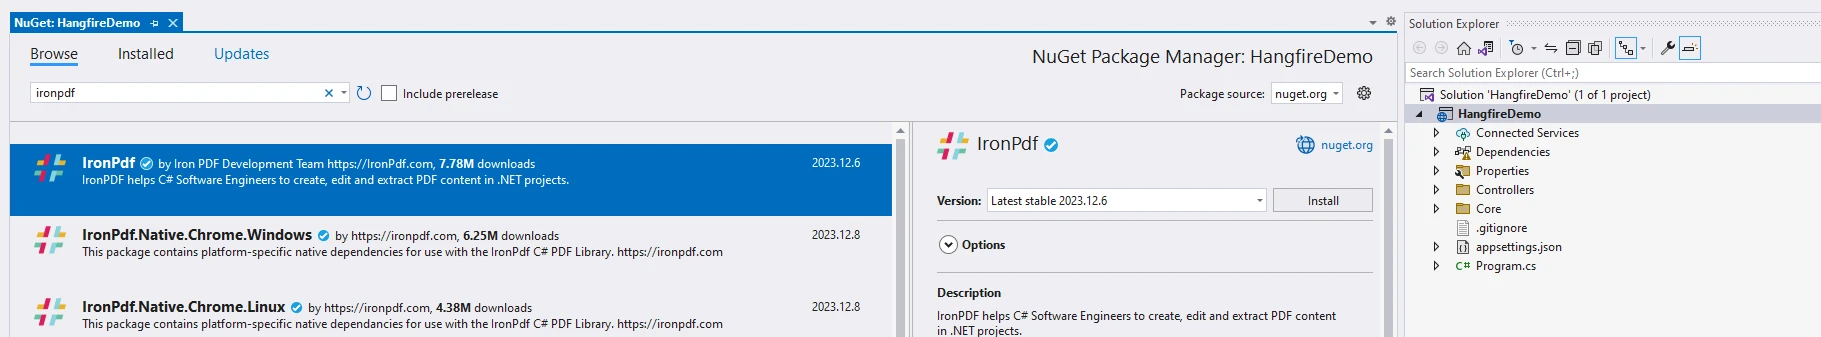 C# Span (How It Works For Developers): Figure 1 - Install IronPDF using NuGet Package Manager by searching "ironpdf" in the search bar of NuGet Package Manager